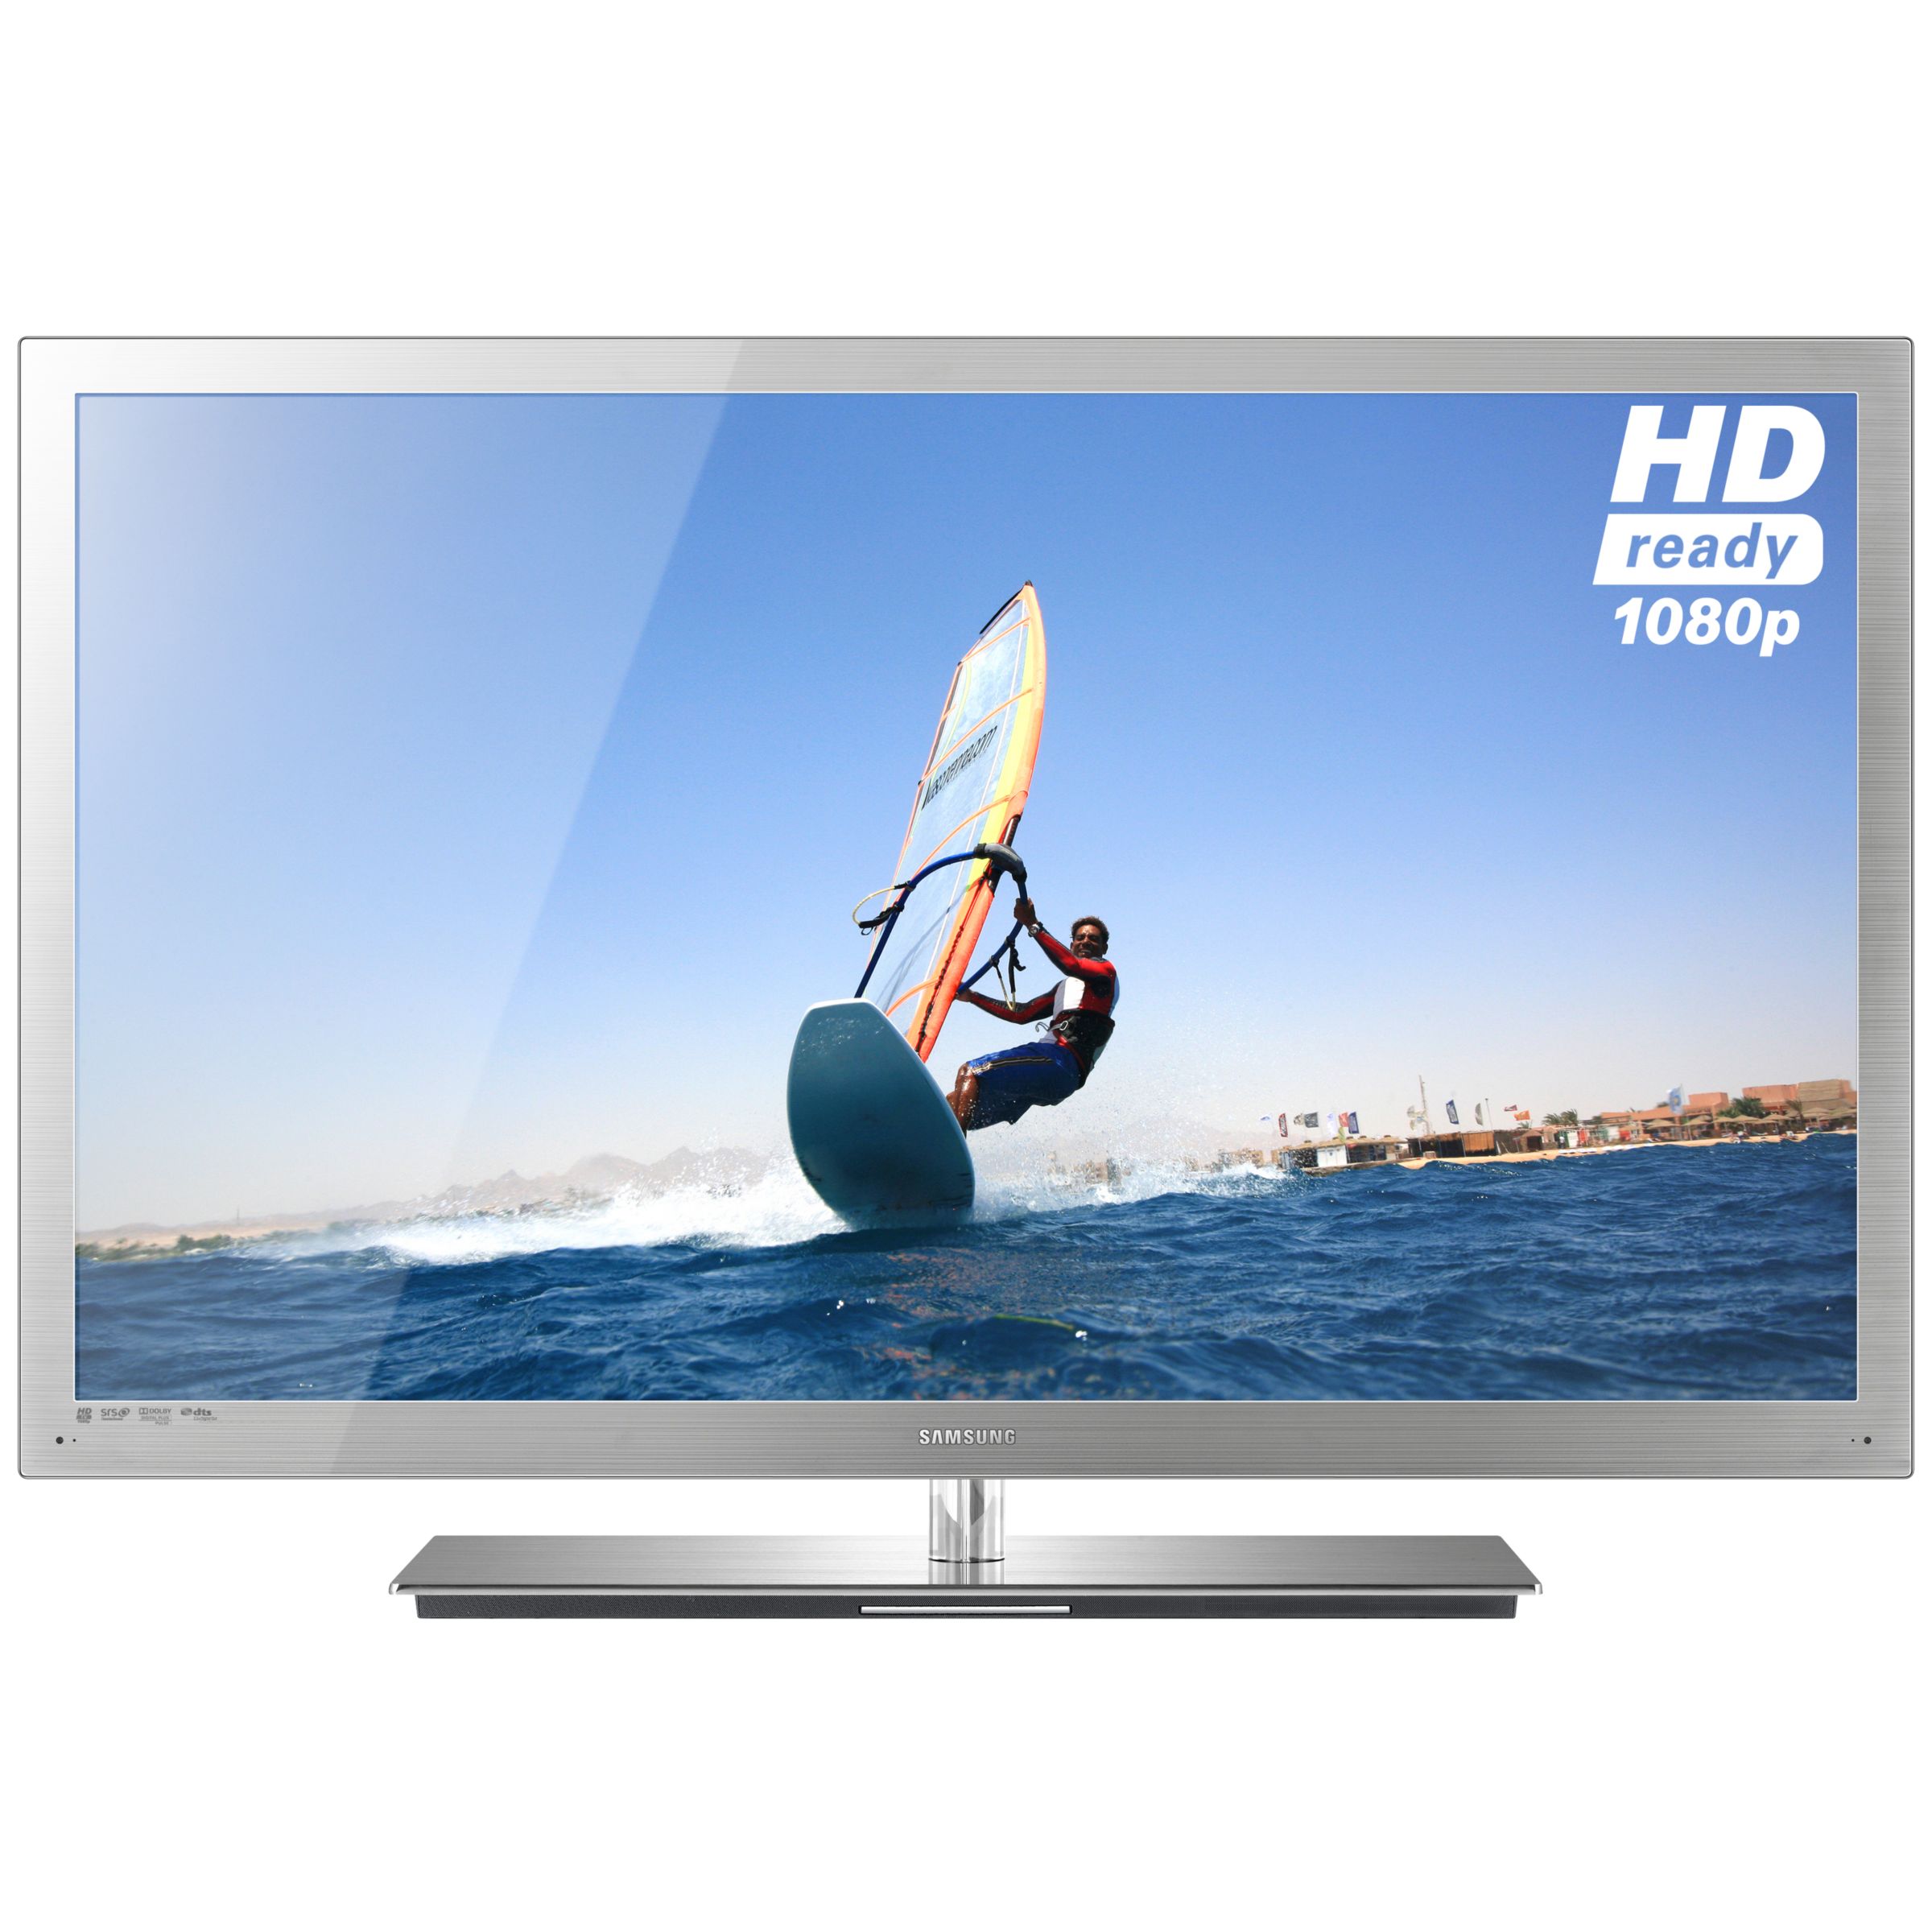 Samsung UE55C9000 LED HD 1080p 3D Television, 55 Inch with Built-in Freeview HD at John Lewis